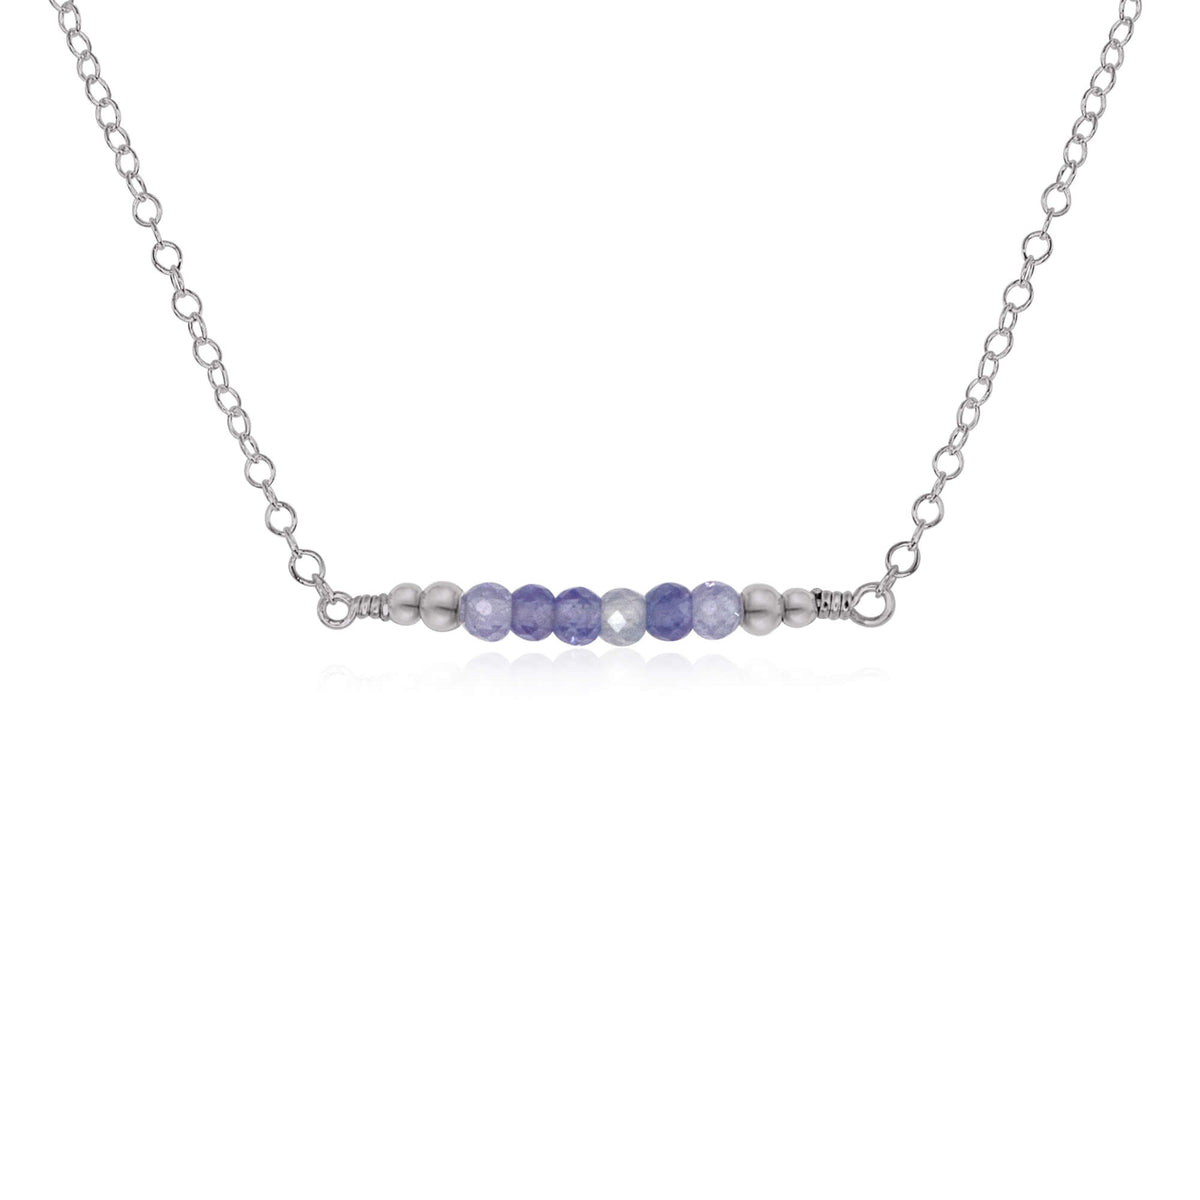 Faceted Bead Bar Necklace - Tanzanite - Stainless Steel - Luna Tide Handmade Jewellery